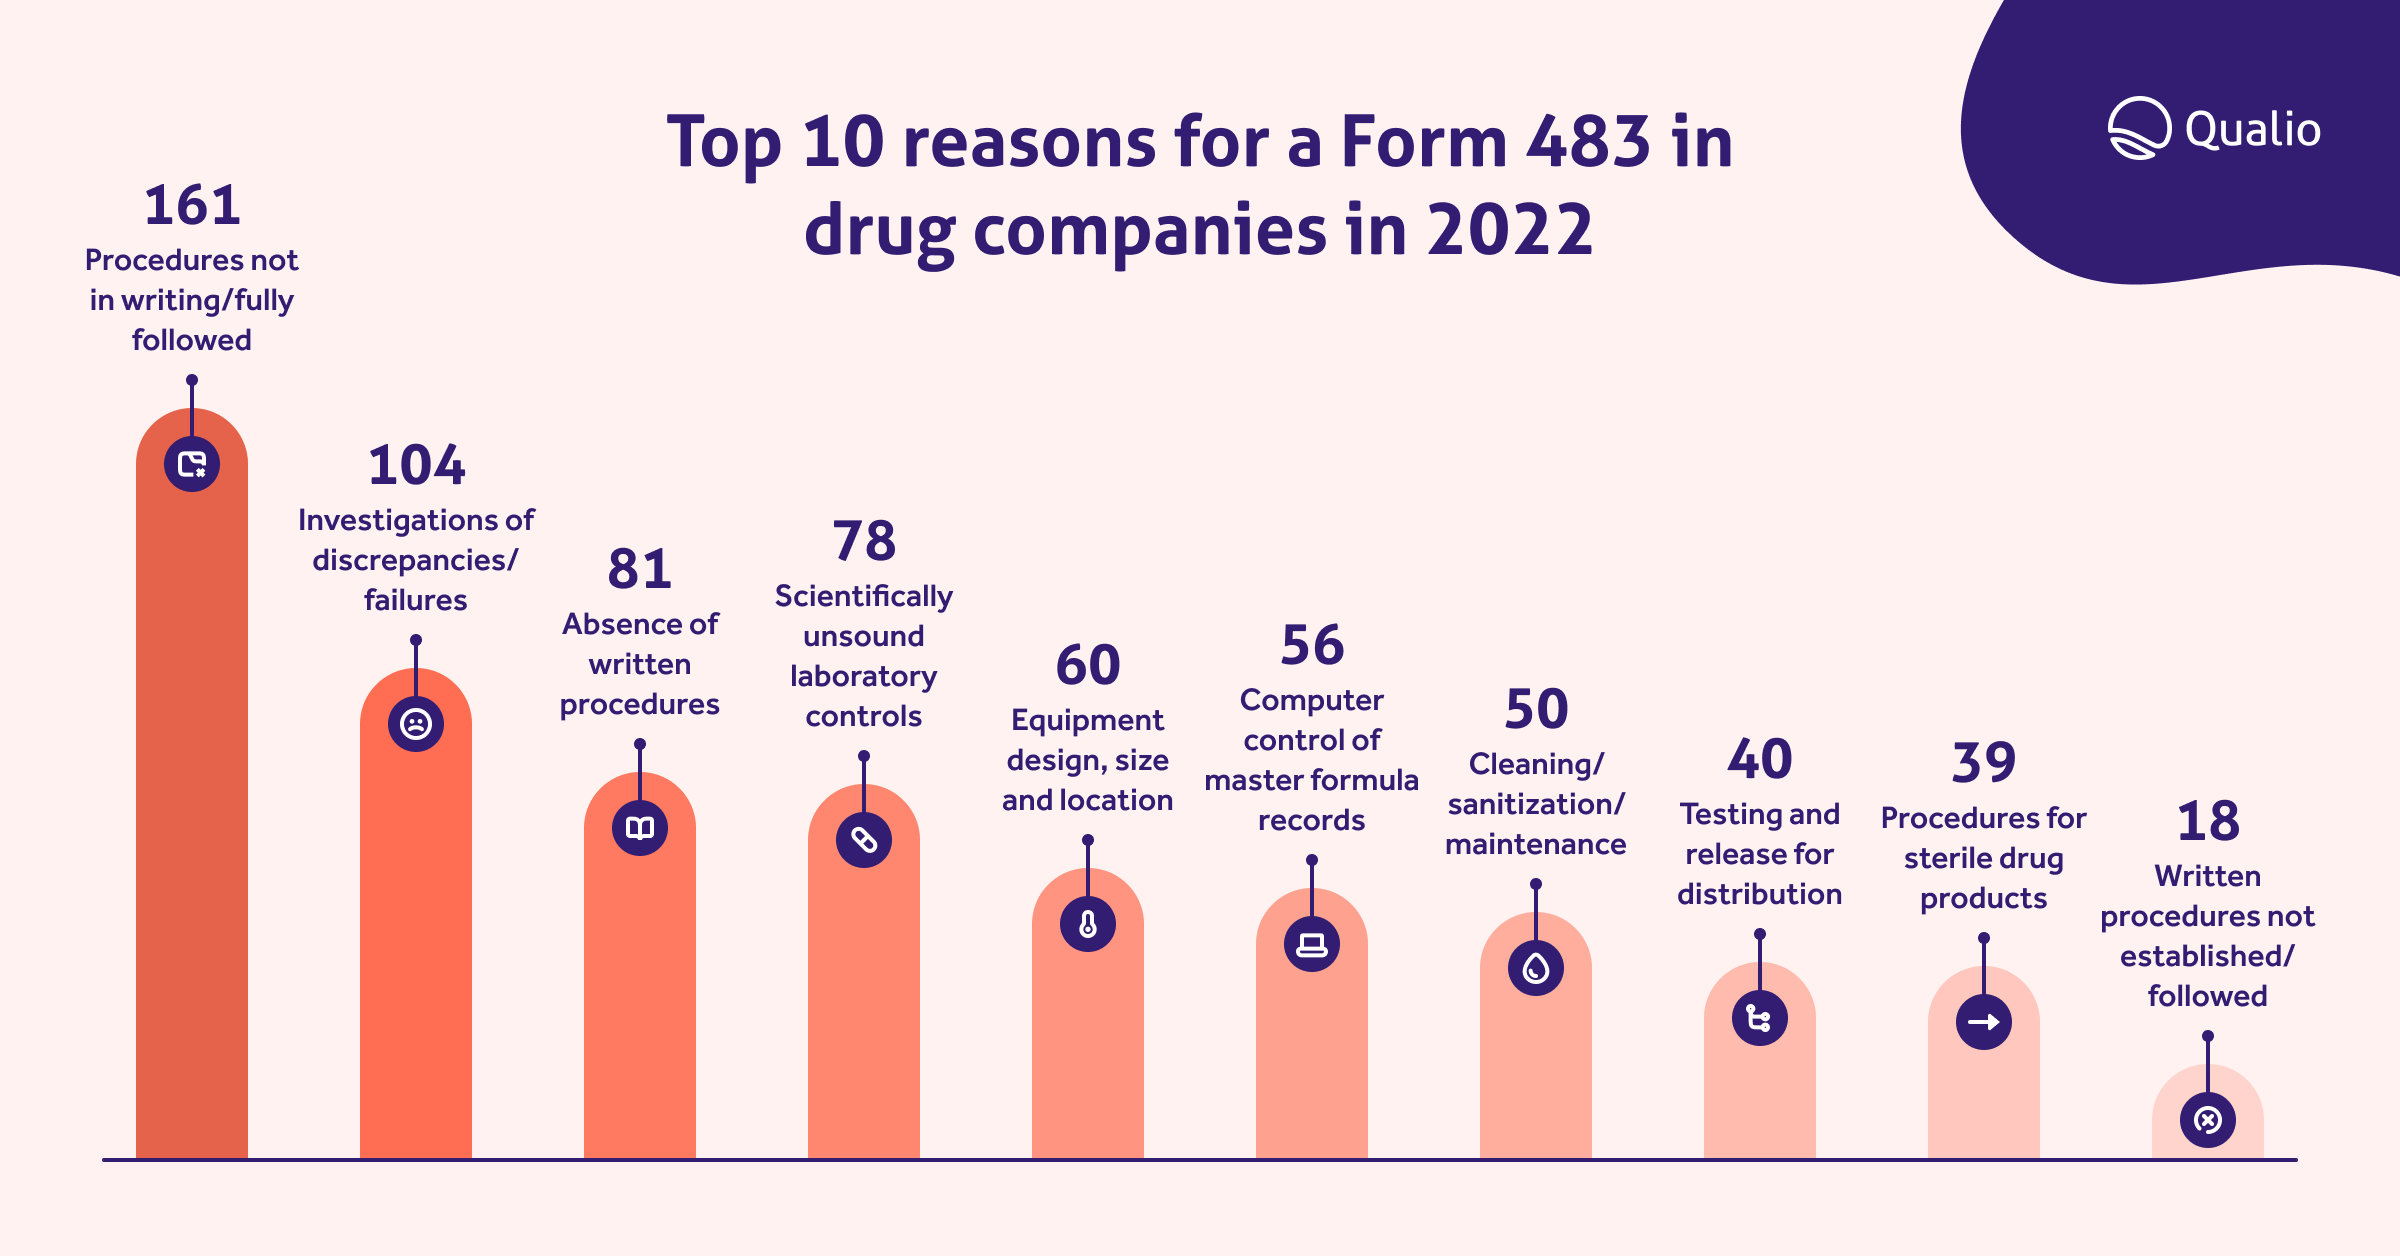 linkedin_top-10-reasons-for-a-form-483-in-drug-companies-in-2022